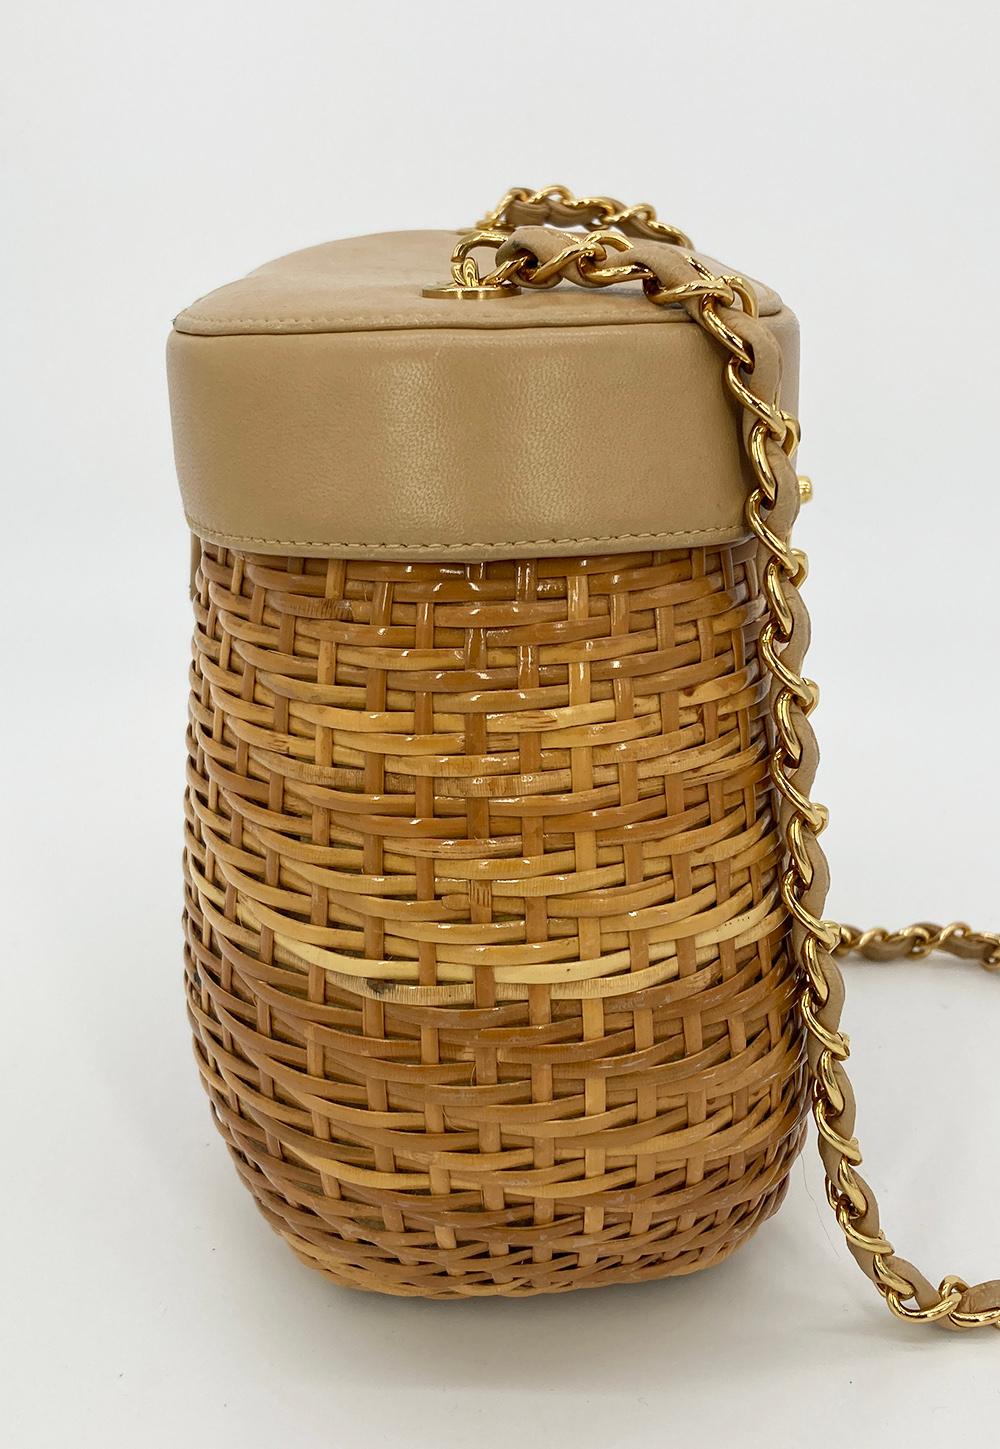 RARE VINTAGE Chanel Wicker Basket Bag In Good Condition For Sale In Philadelphia, PA